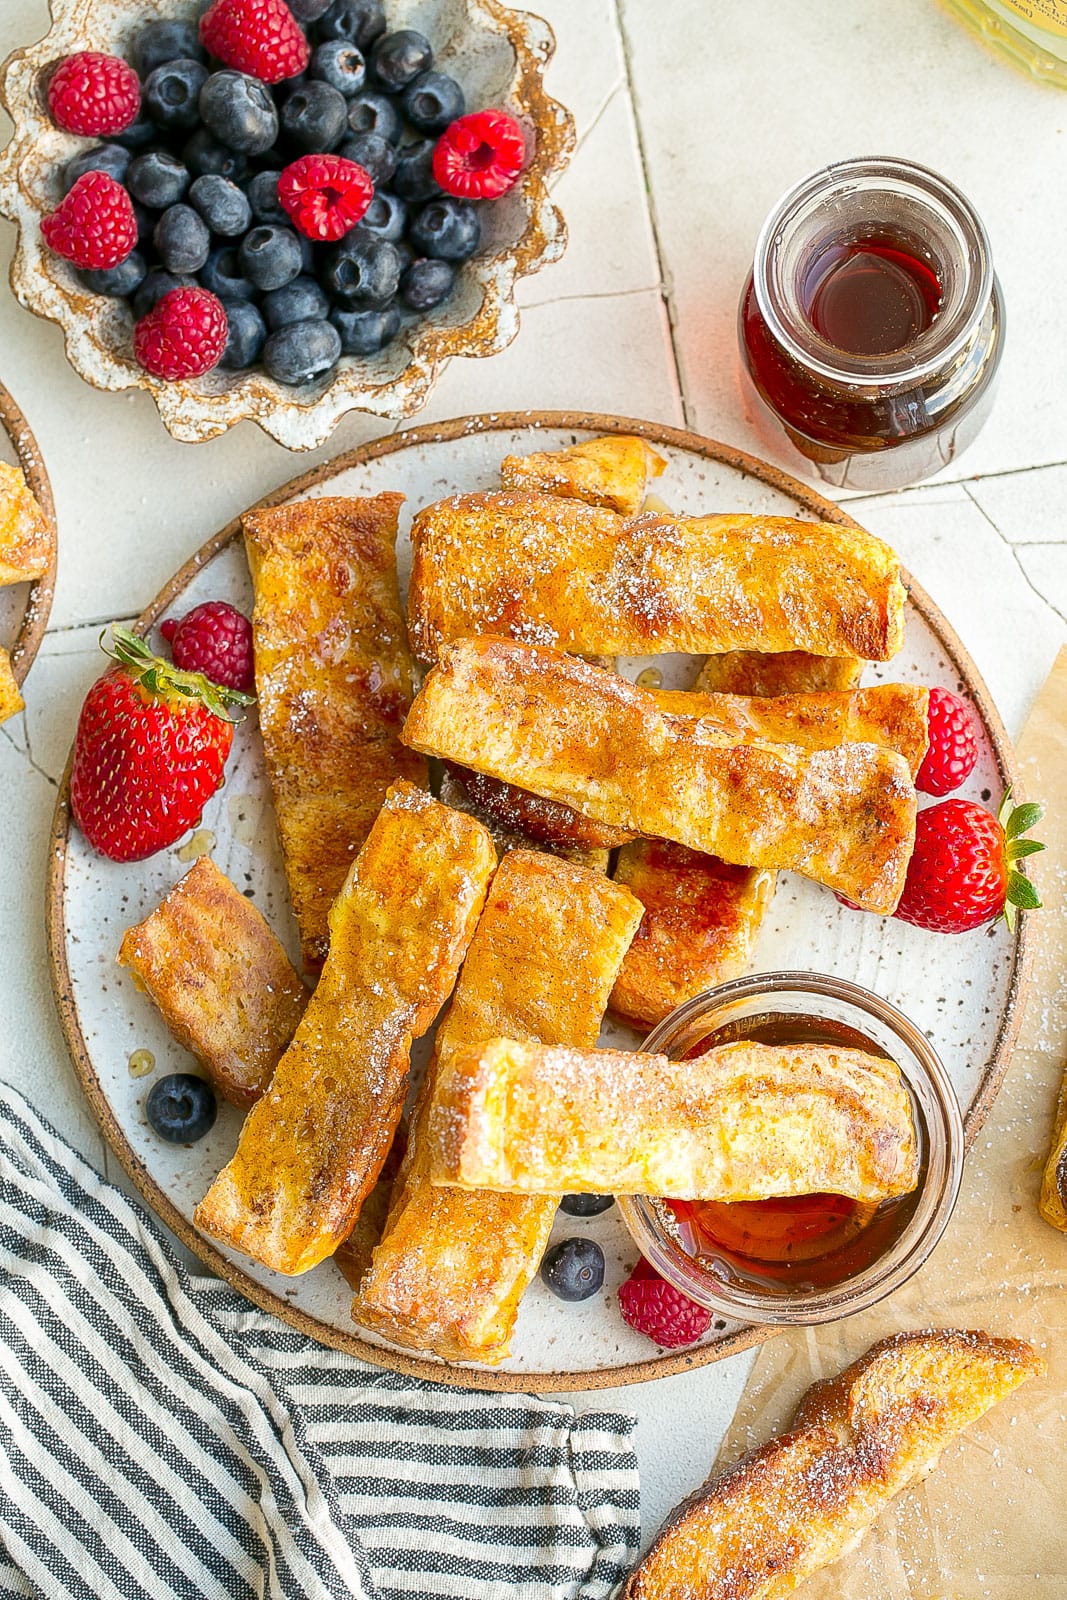 Plate full of french toast sticks.